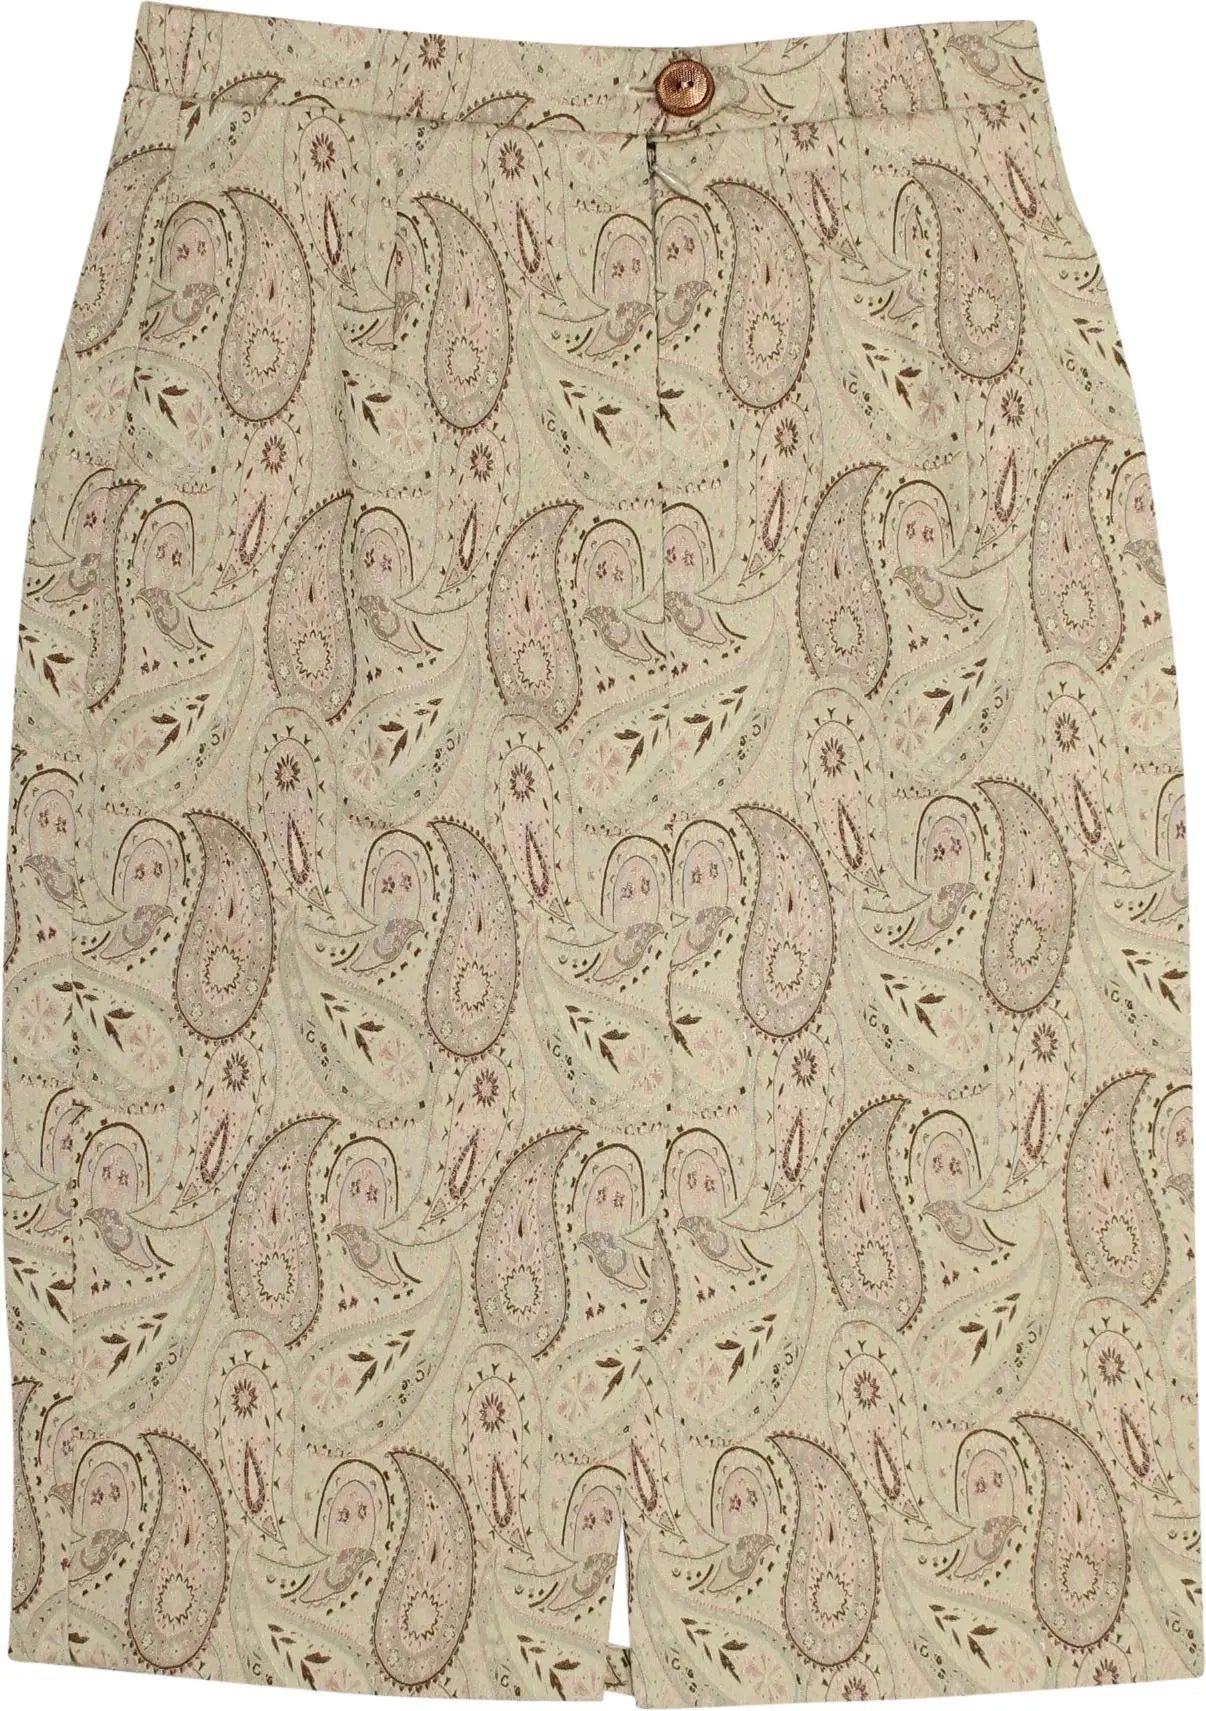 Unknown - Paisley Skirt- ThriftTale.com - Vintage and second handclothing